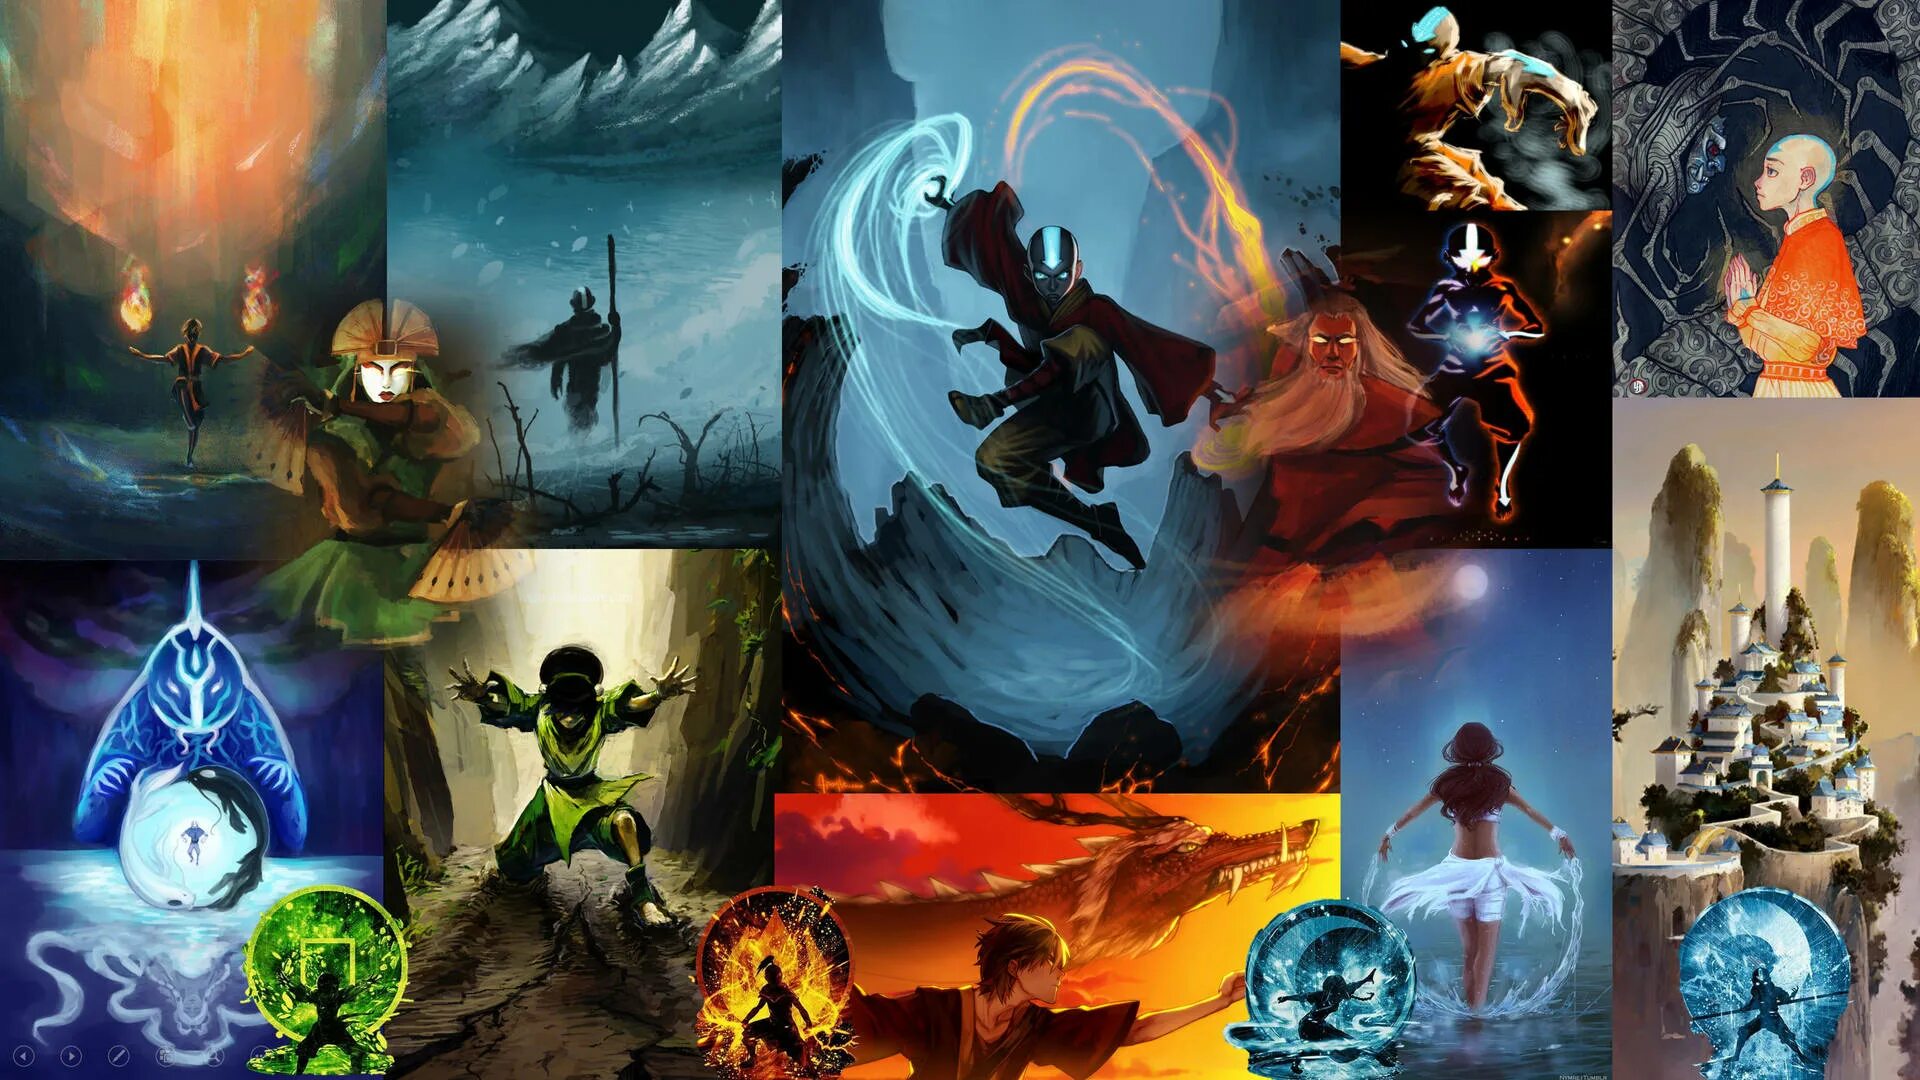 Цикл аватара. Avatar the last Airbender. Avatar Legend of Aang. Аватар ласт Аирбендер. Avatar Airbender.